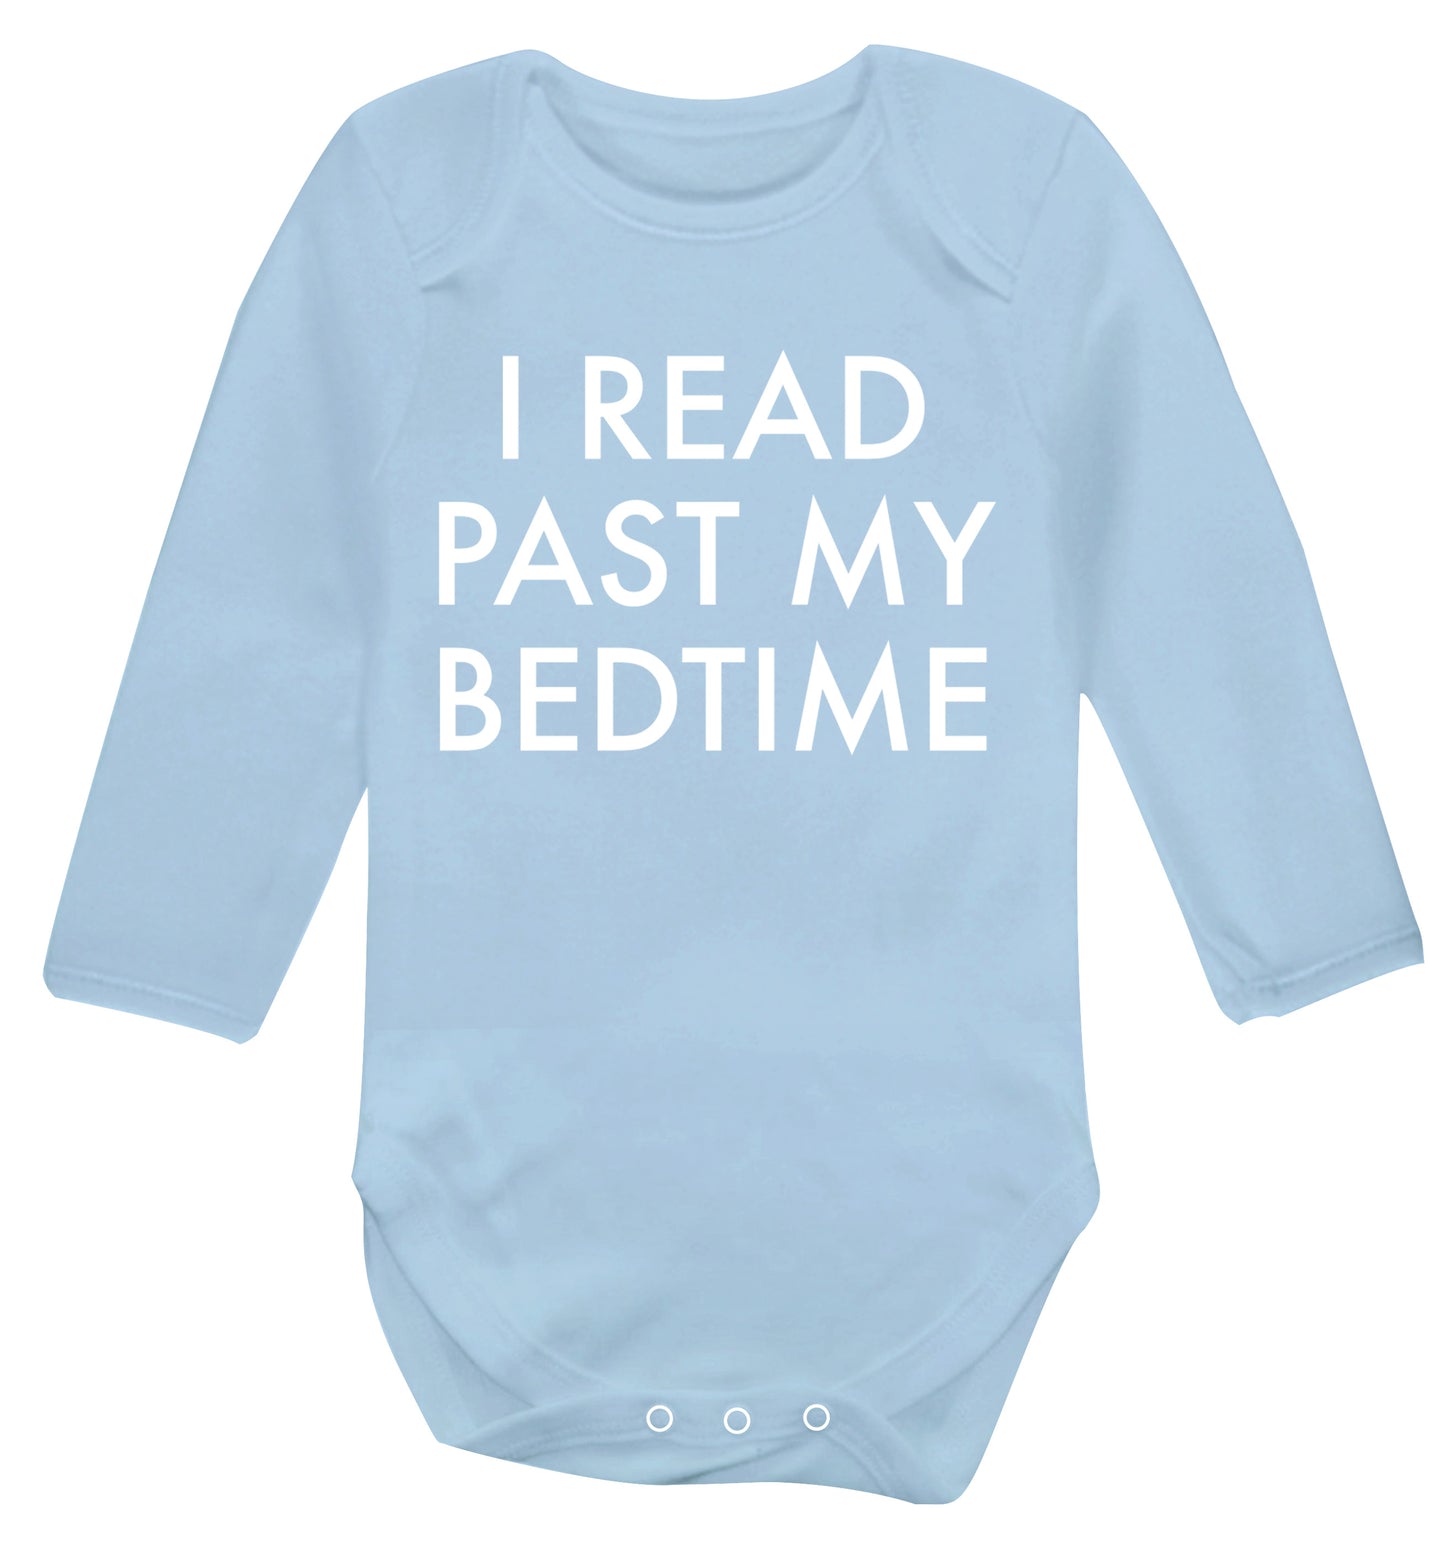 I read past my bedtime Baby Vest long sleeved pale blue 6-12 months